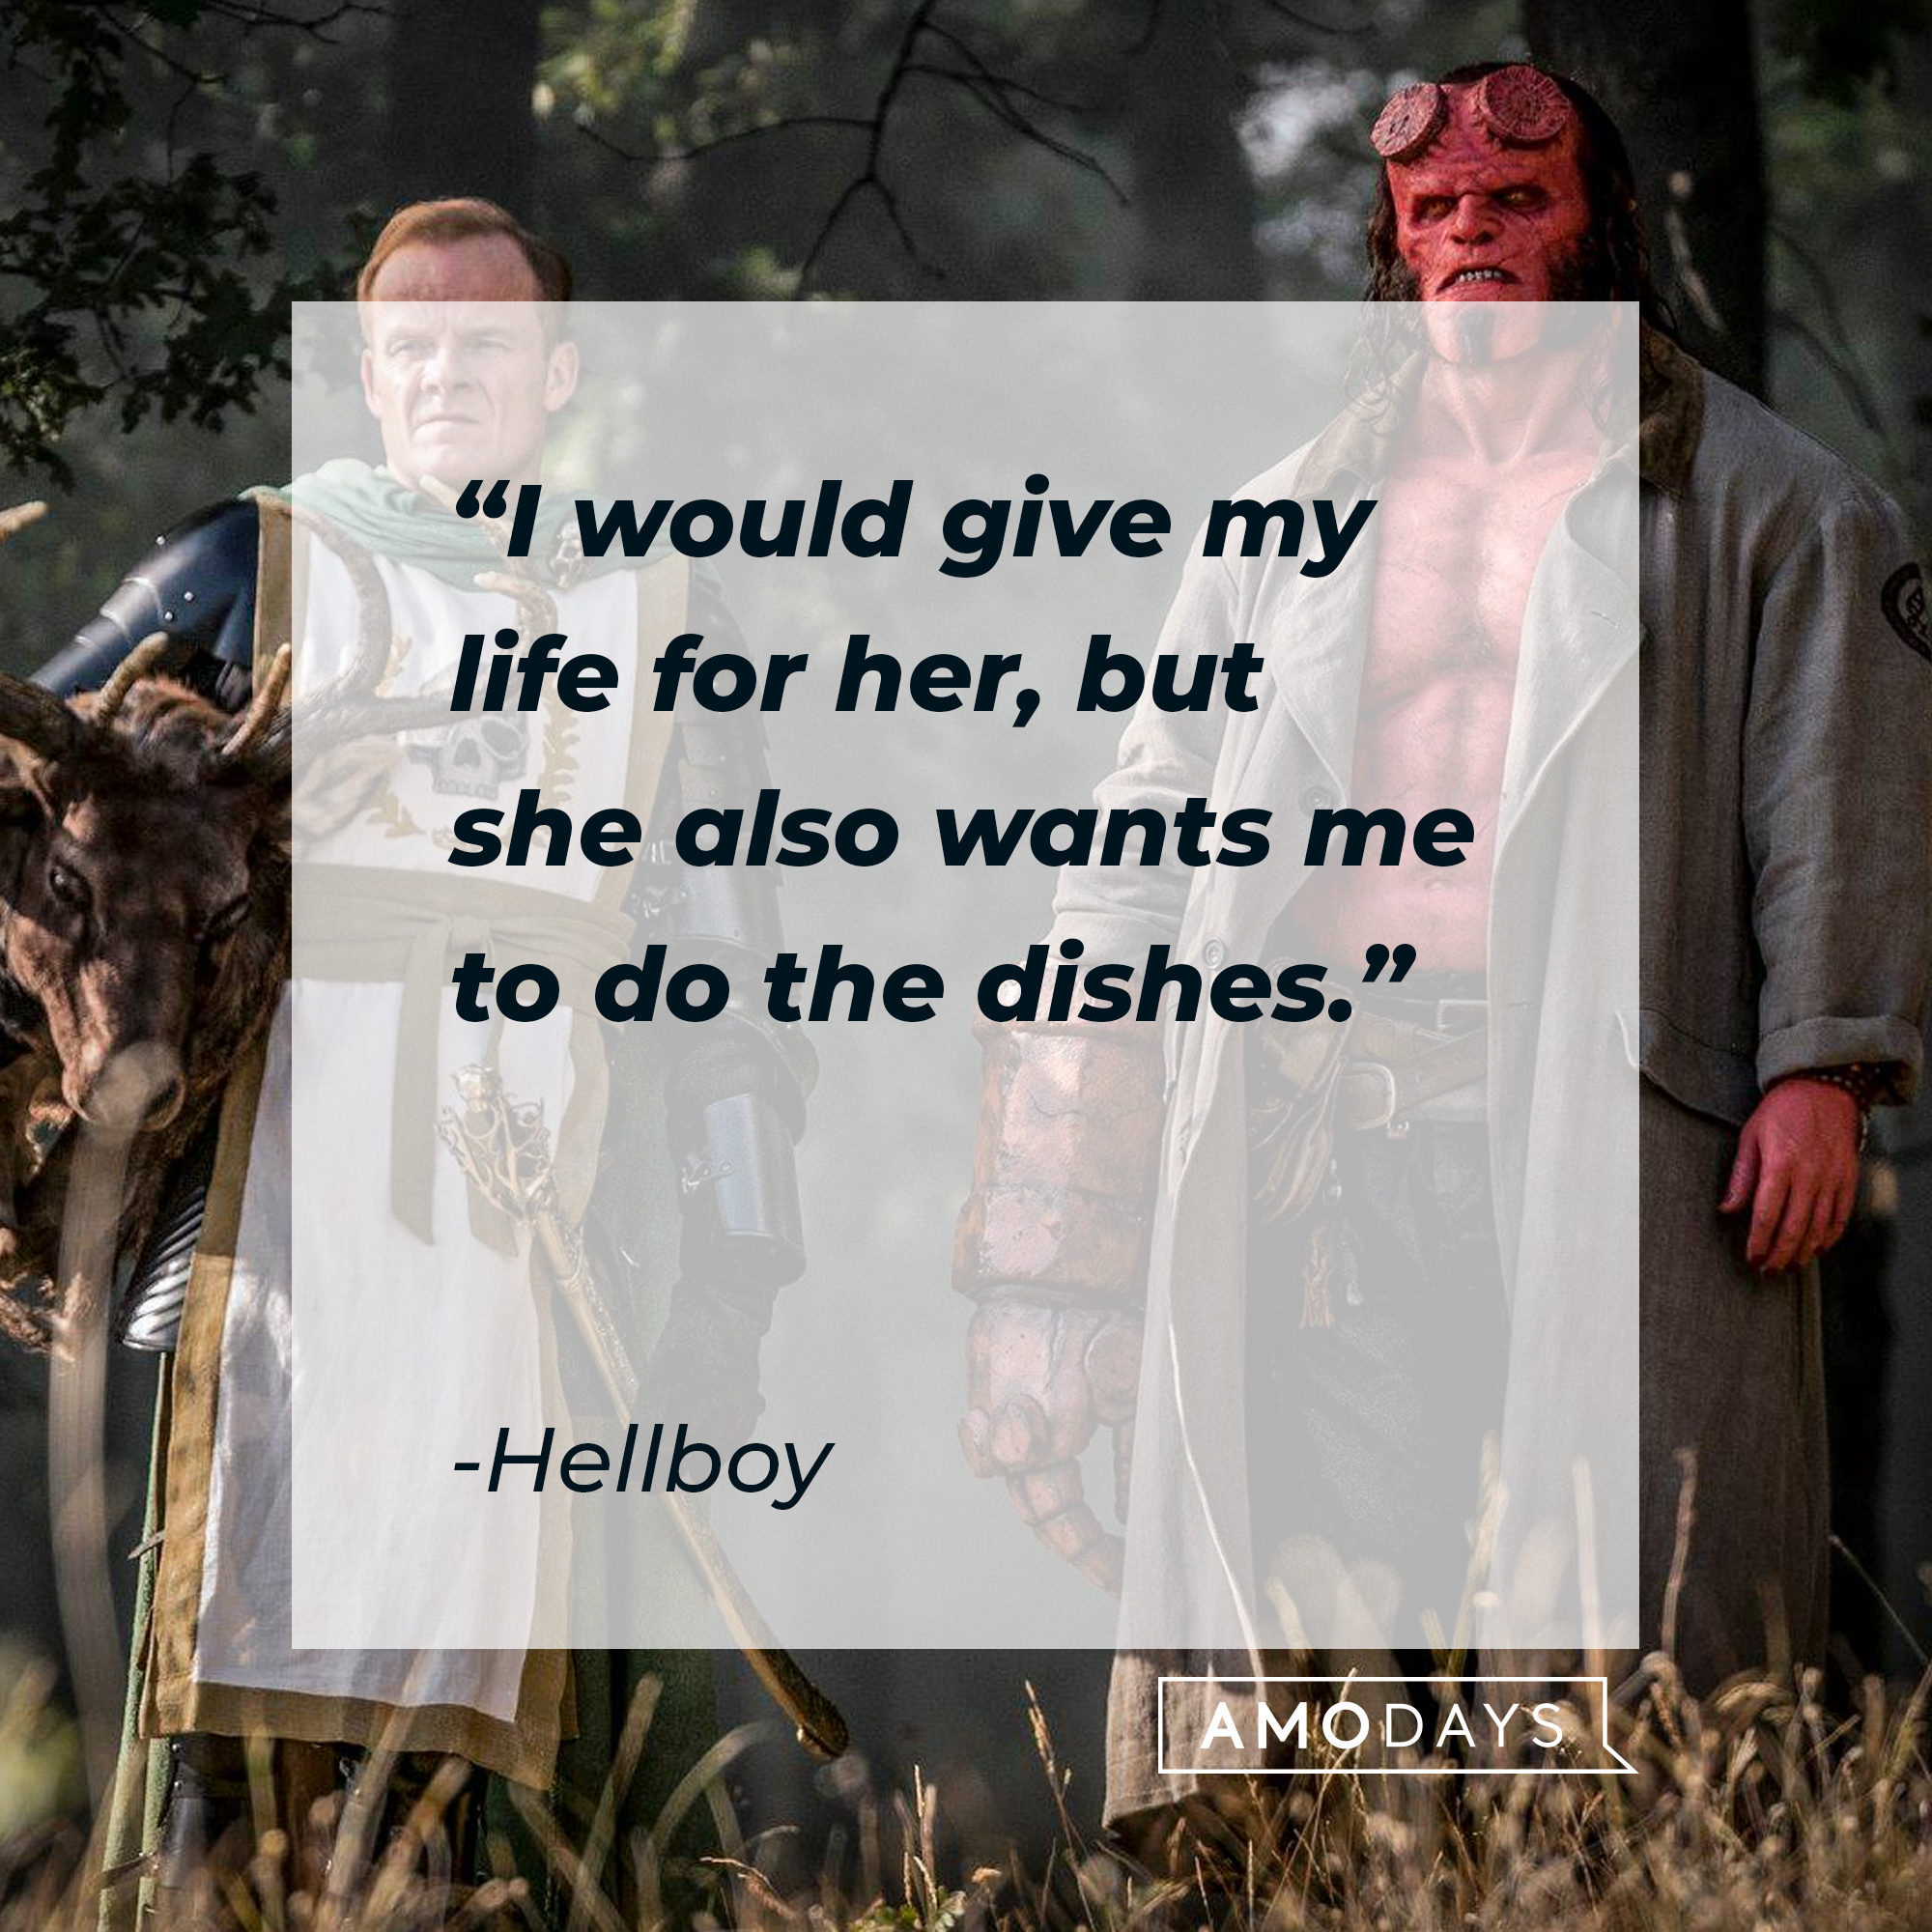 Hellboy's quote: "I would give my life for her, but she also wants me to do the dishes." | Source: facebook.com/hellboymovie